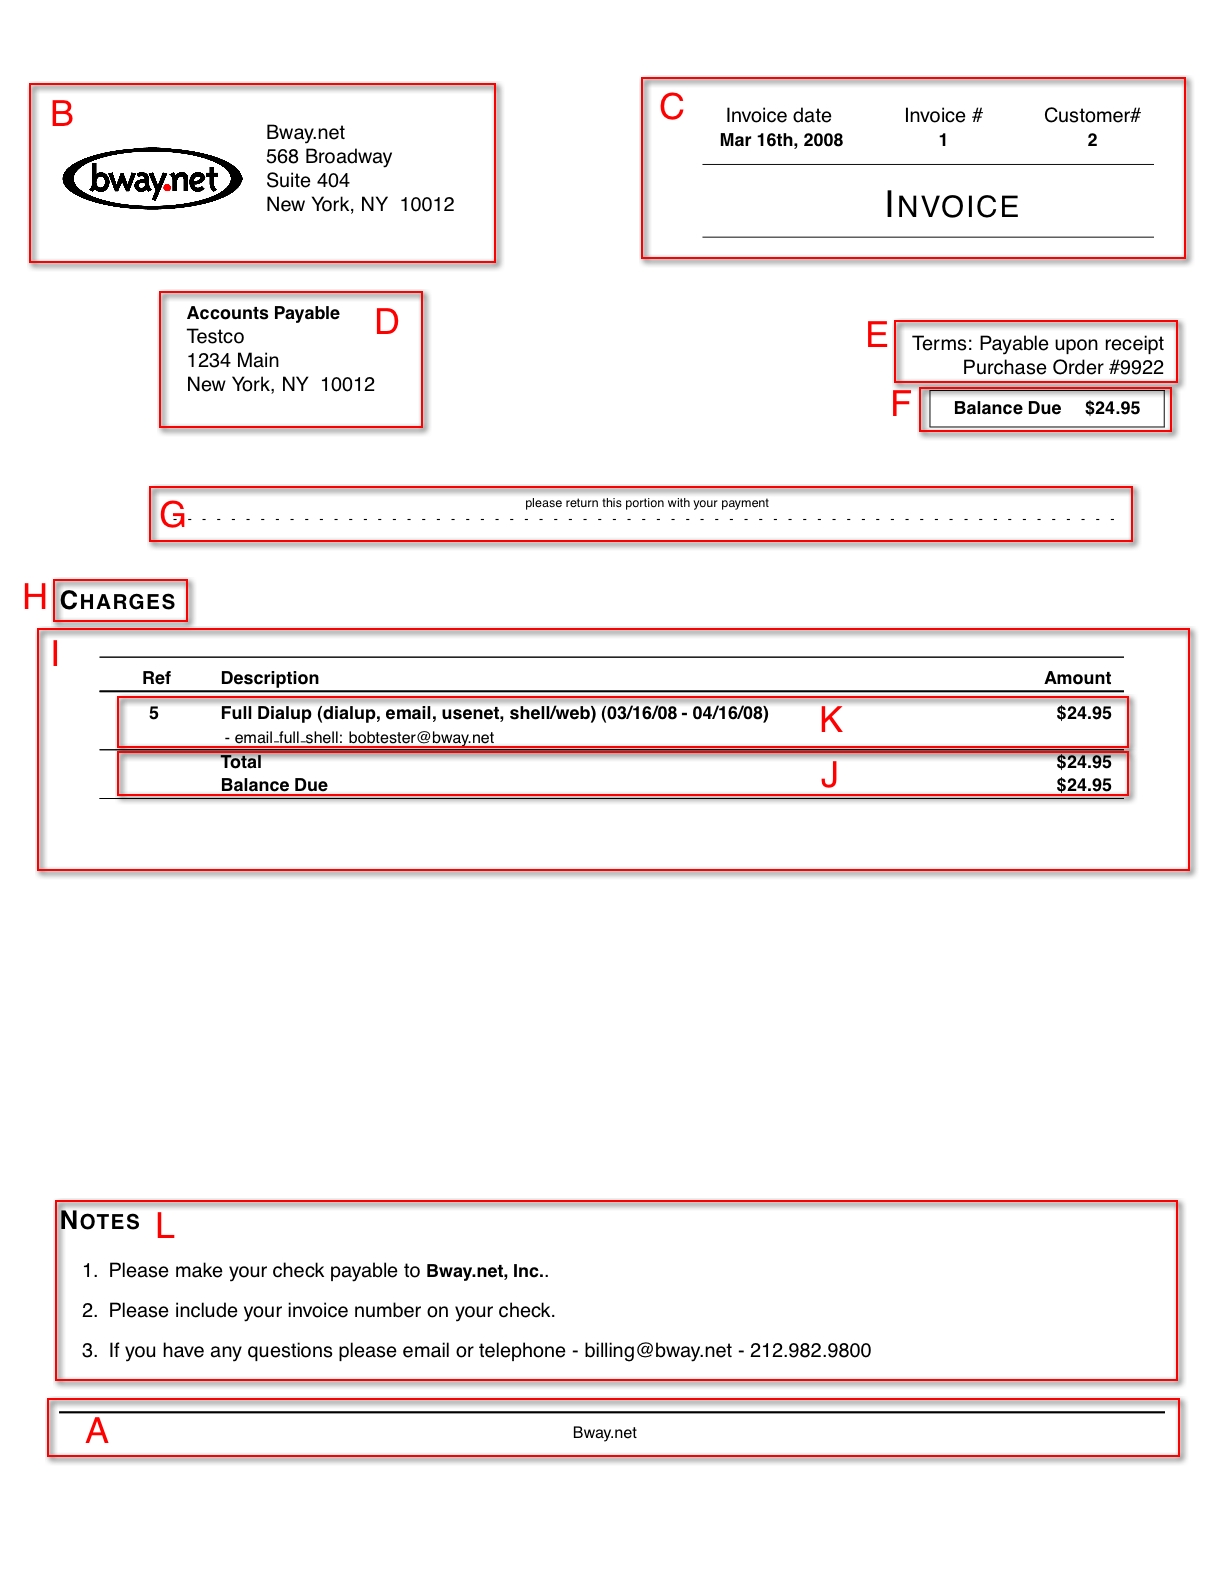 freeside user forum view topic altering typeset invoice feedback latex invoice template